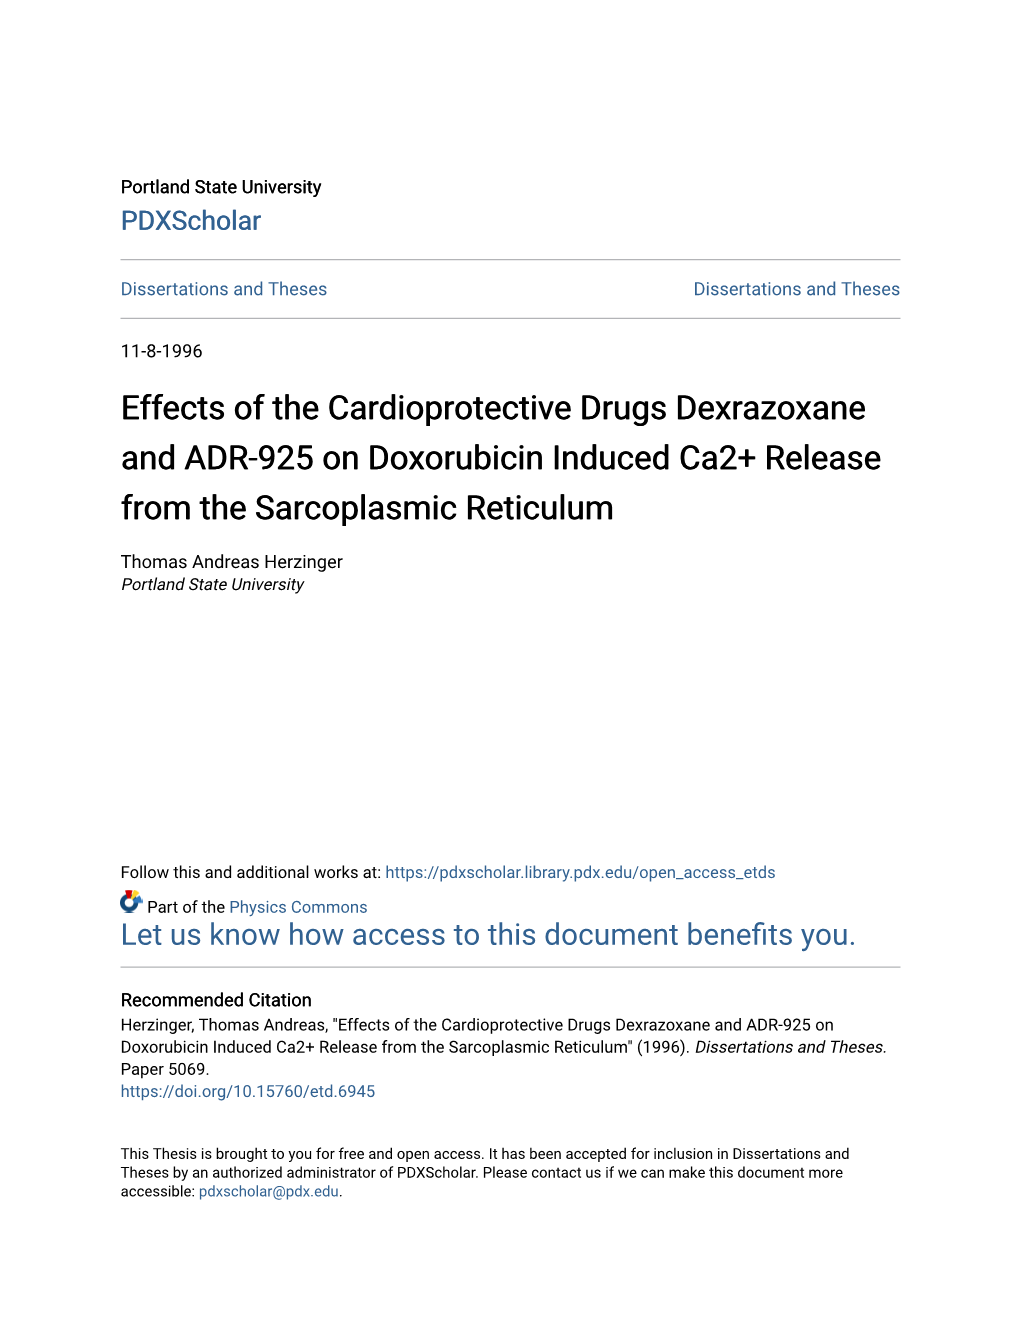 Effects of the Cardioprotective Drugs Dexrazoxane and ADR-925 on Doxorubicin Induced Ca2+ Release from the Sarcoplasmic Reticulum